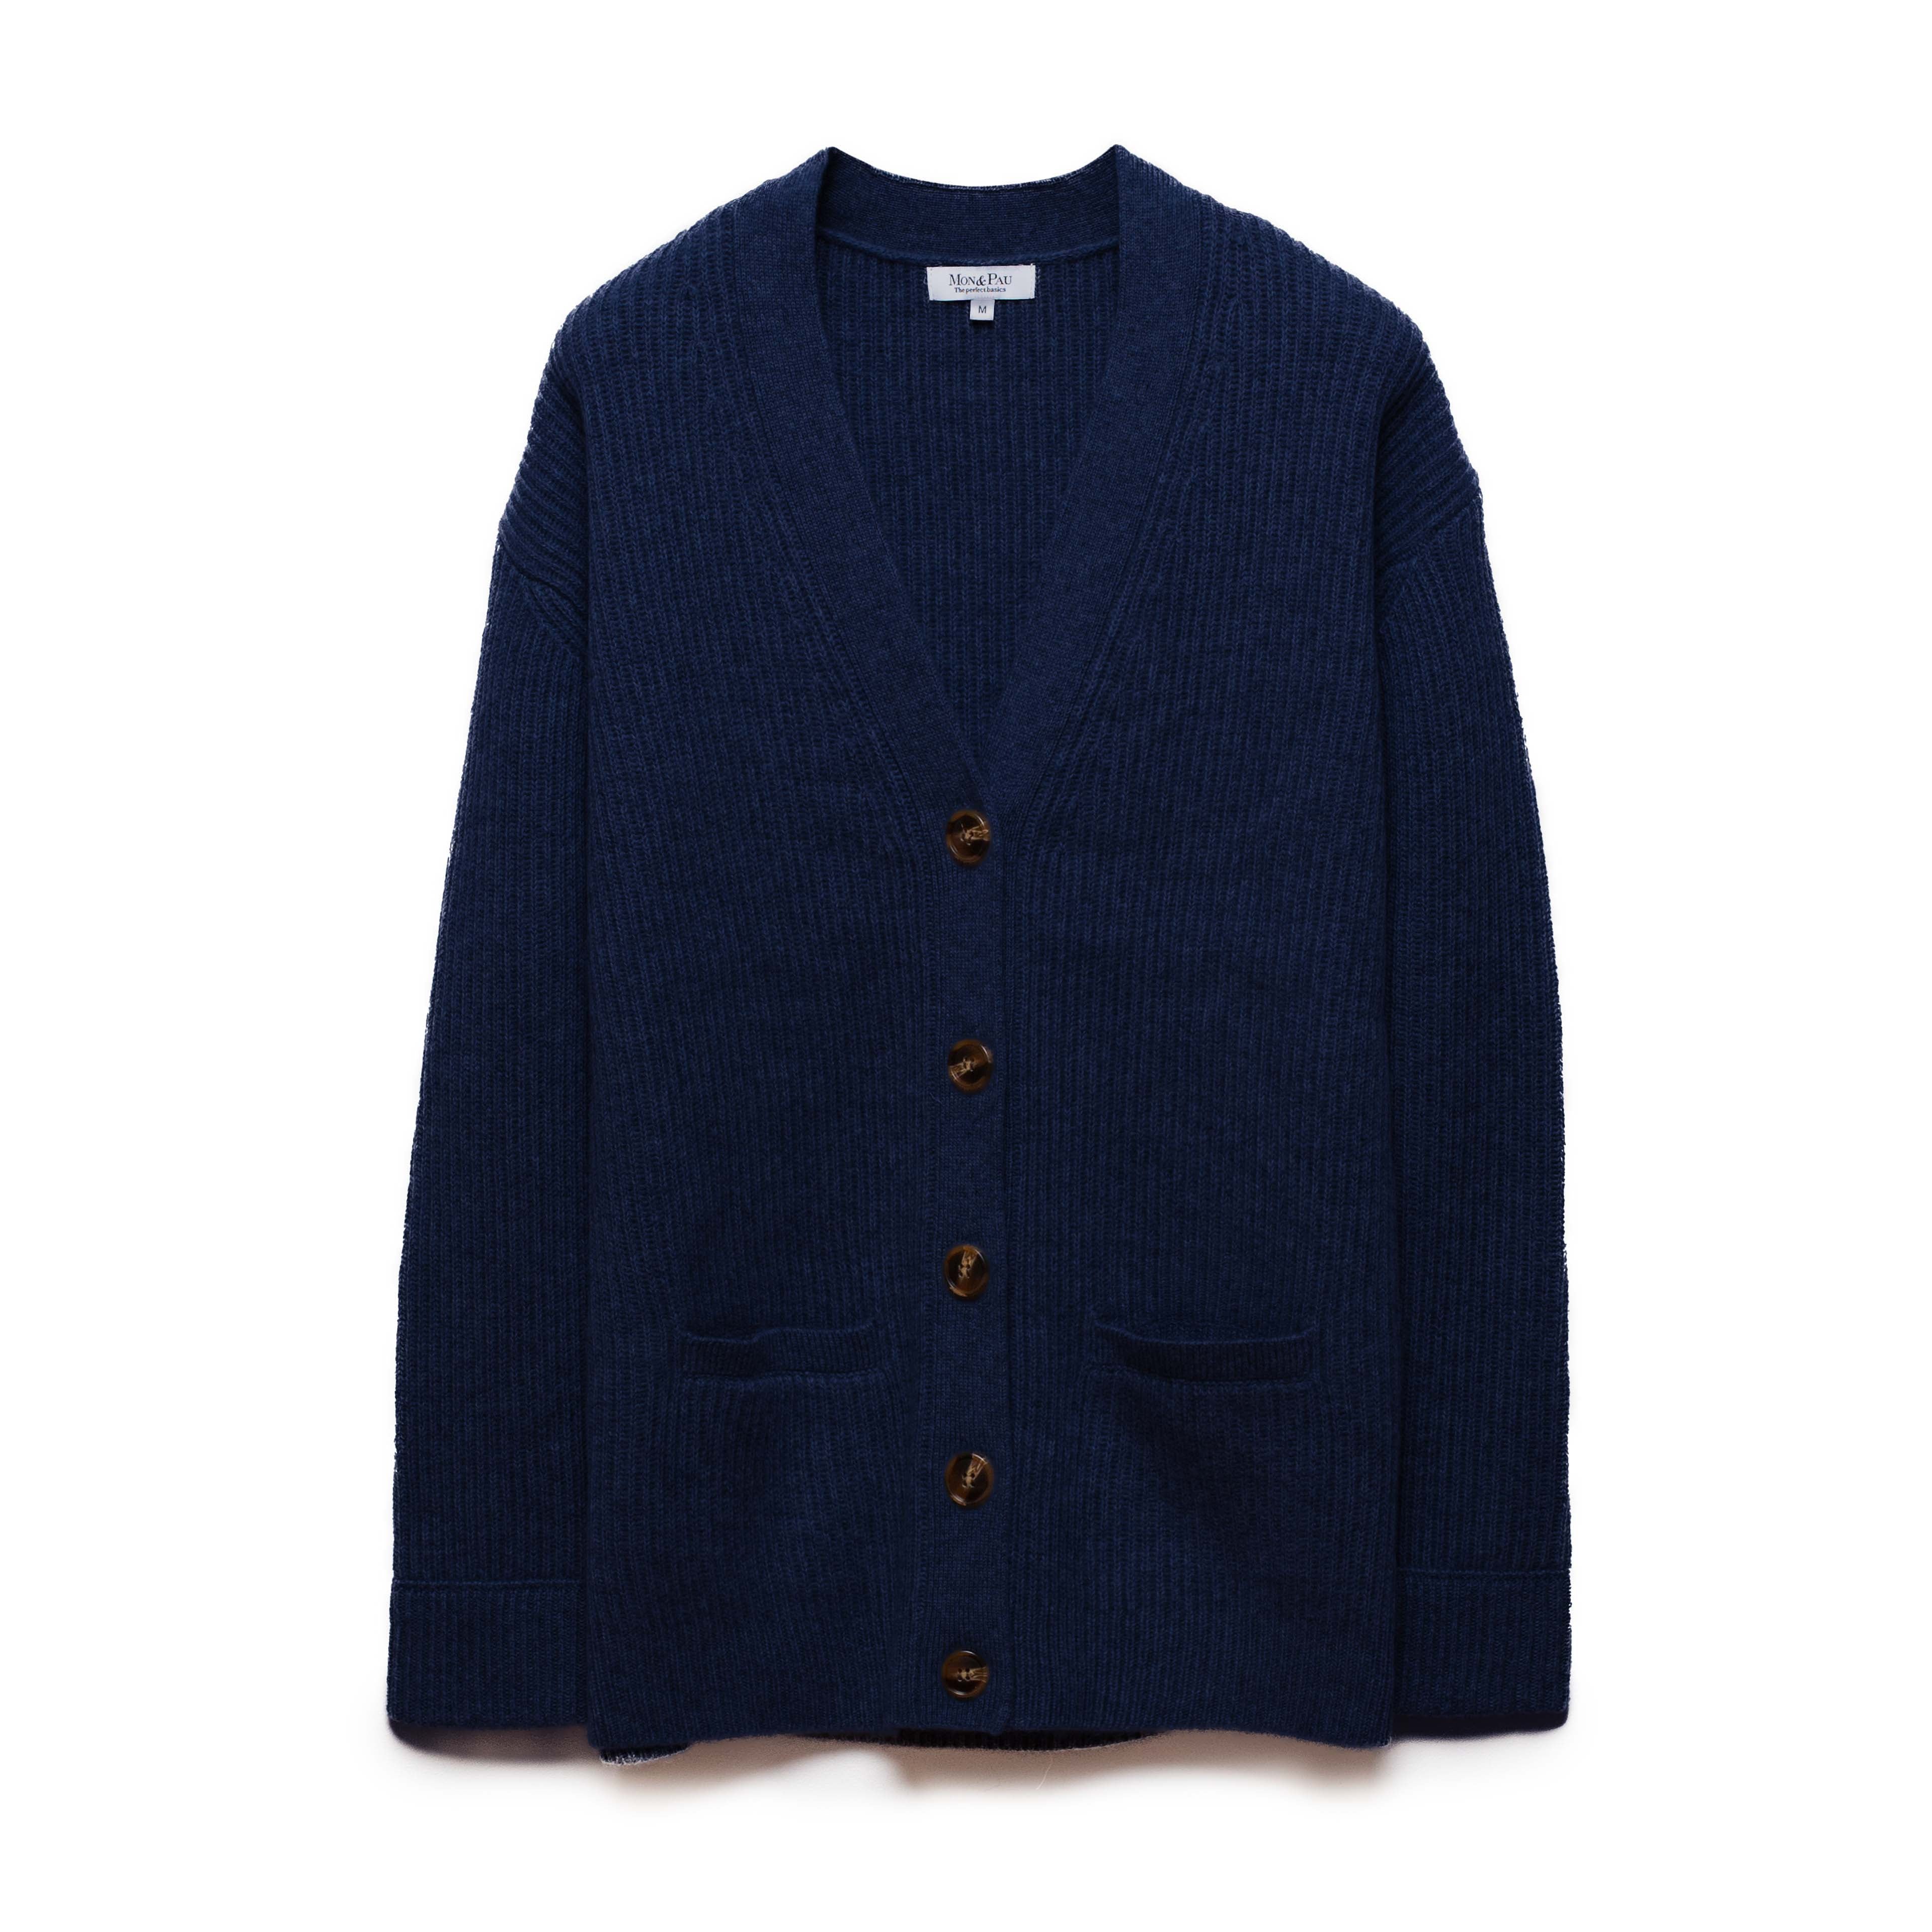 Navy Cardigan Cashmere and Wool